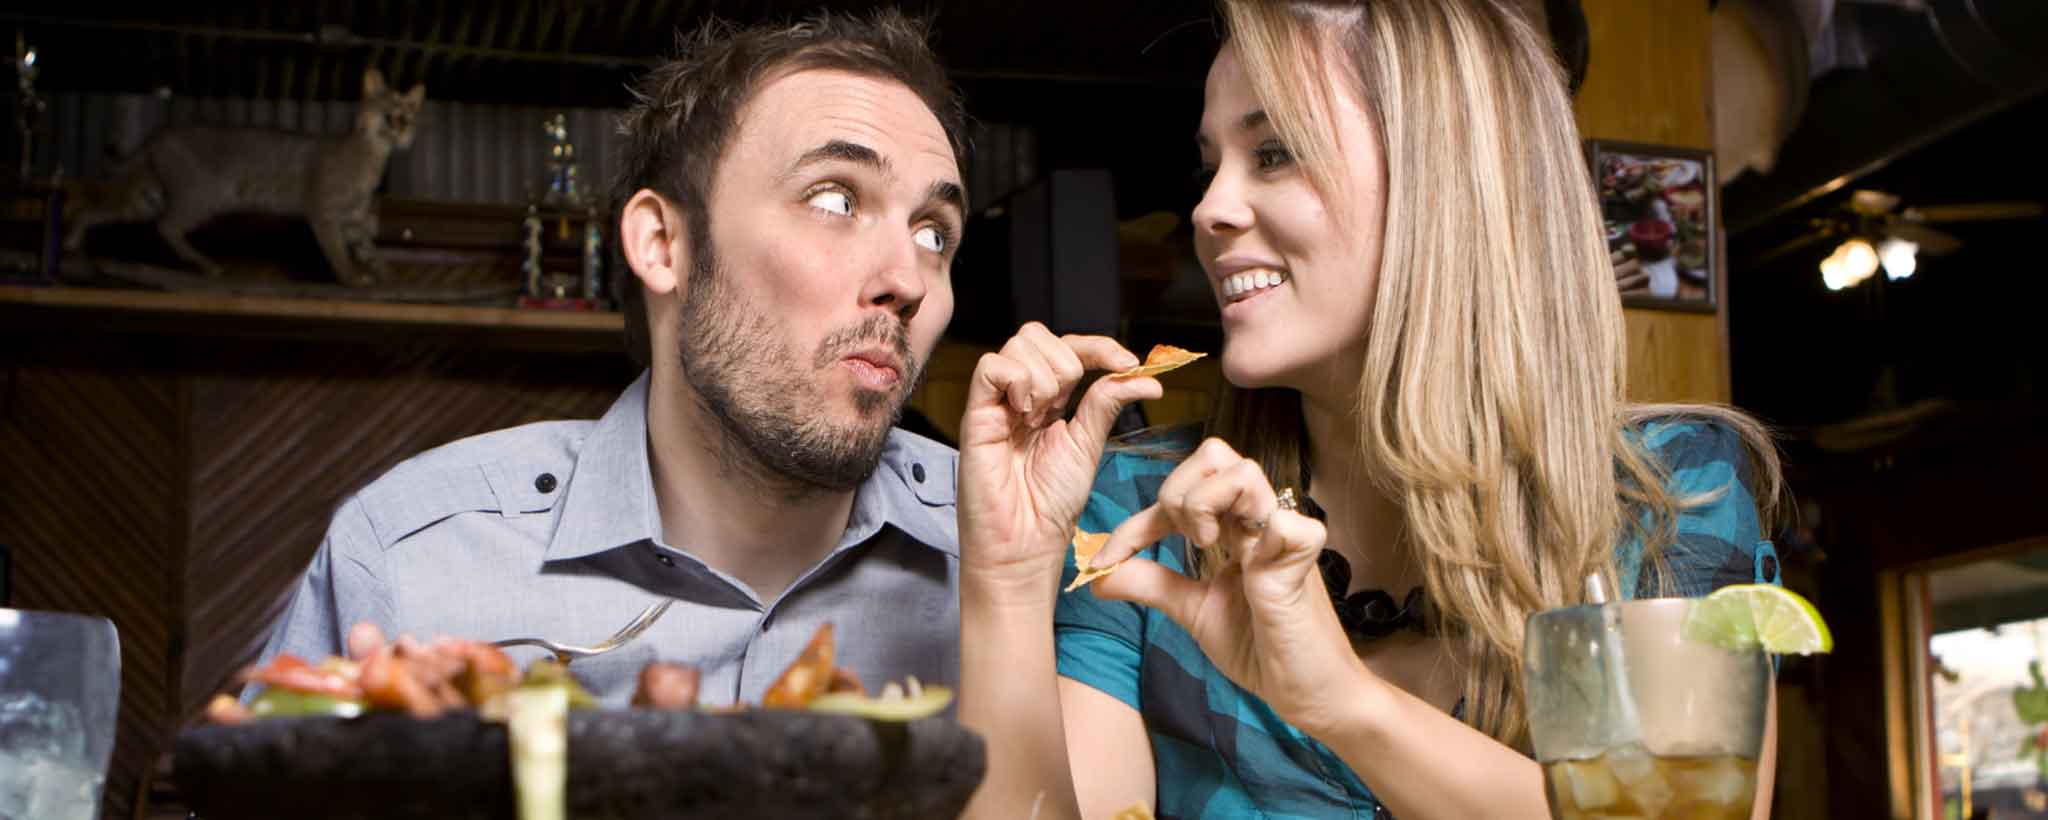 'Couple eating chips and salsa'